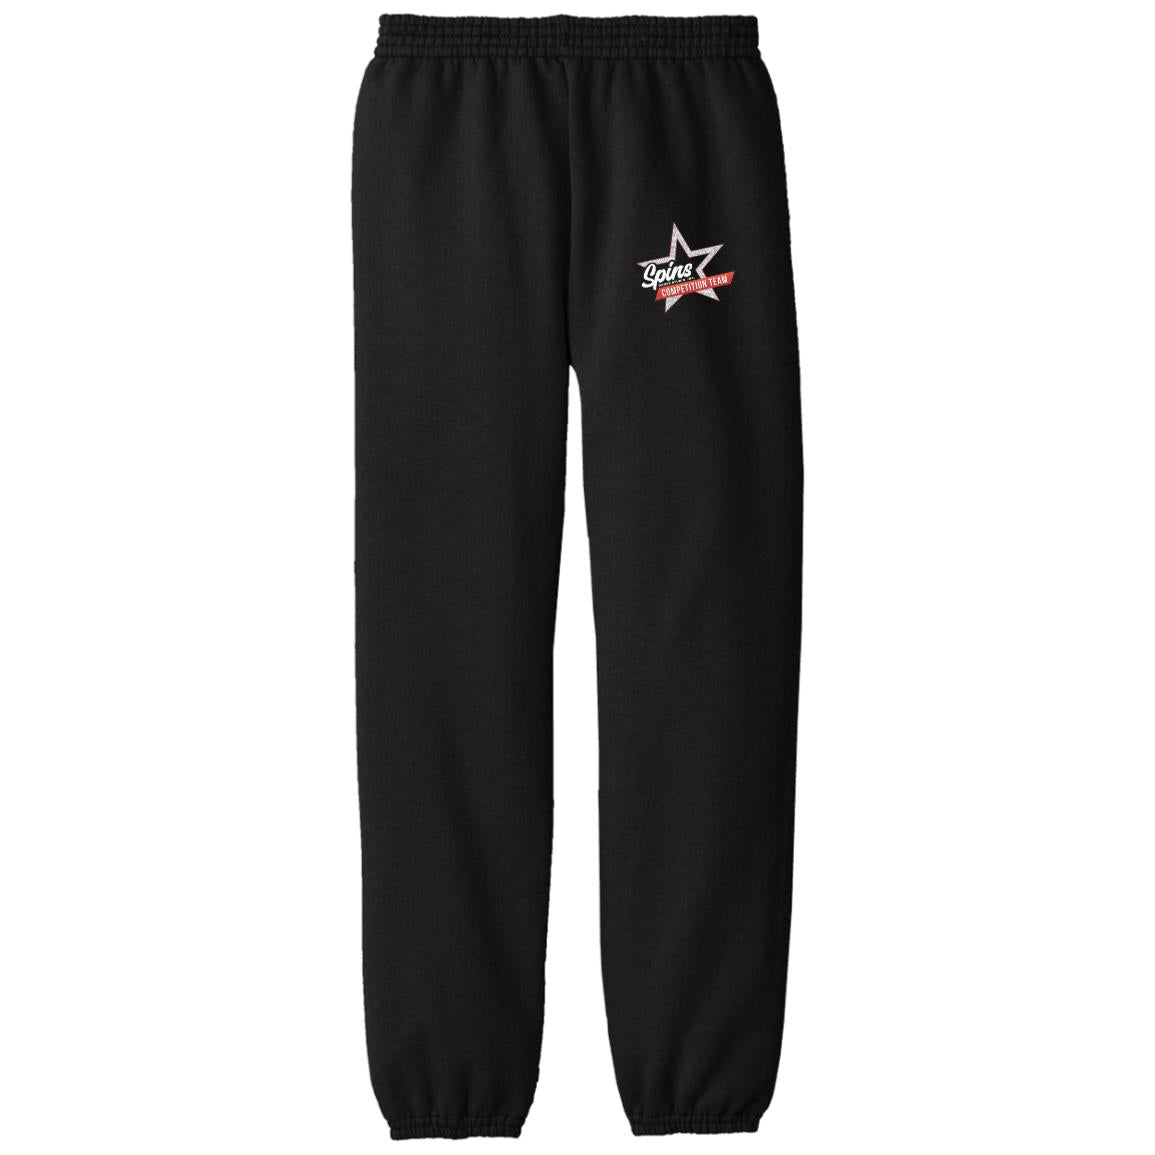 Youth Closed Bottom Sweatpants with Pockets